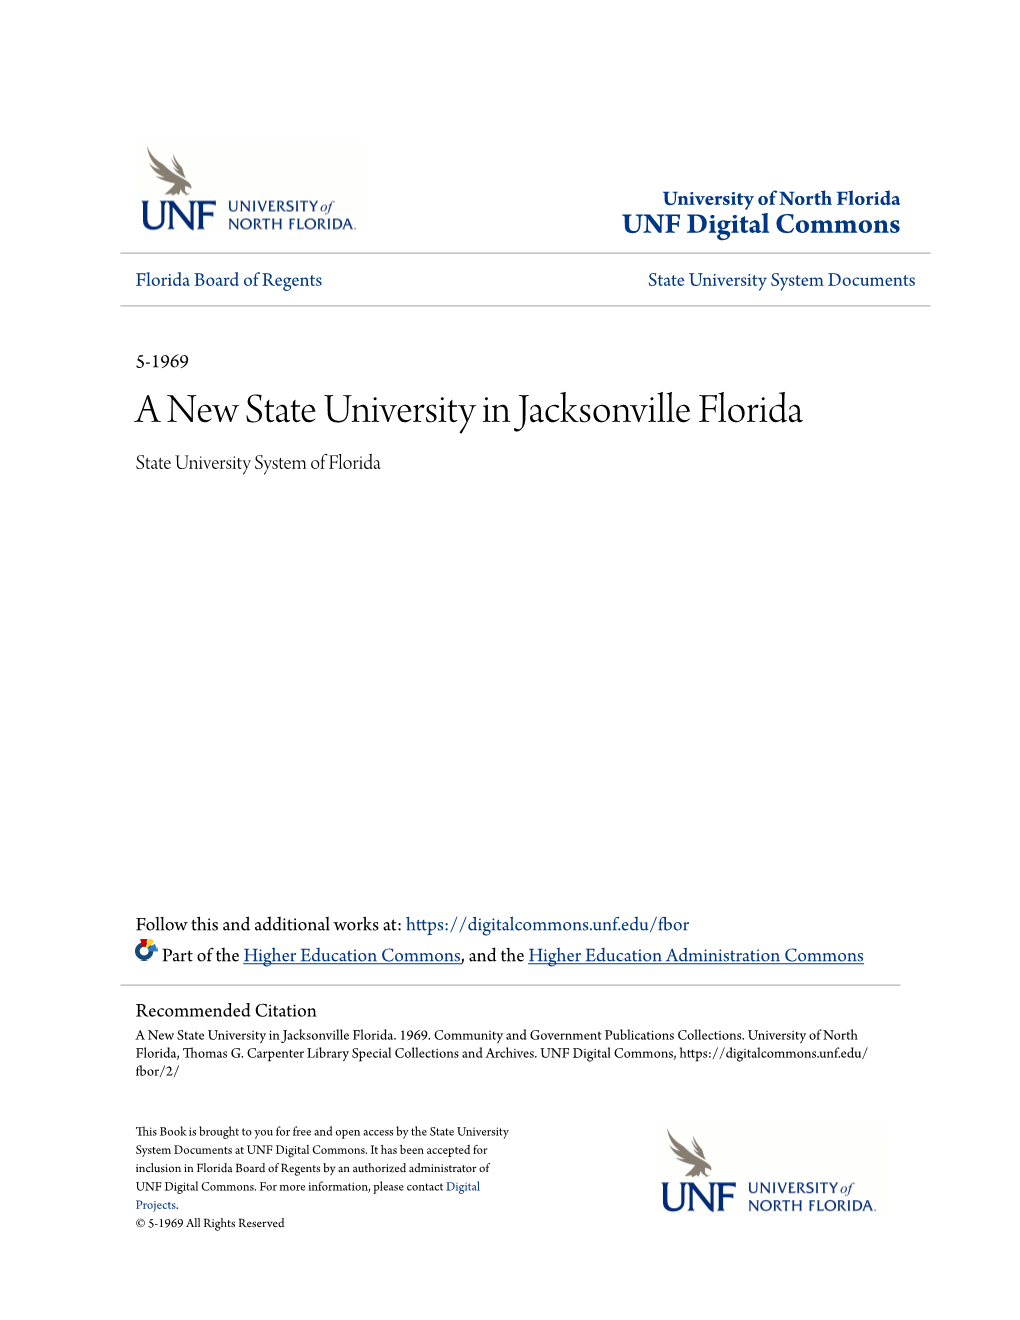 A New State University in Jacksonville Florida State University System of Florida